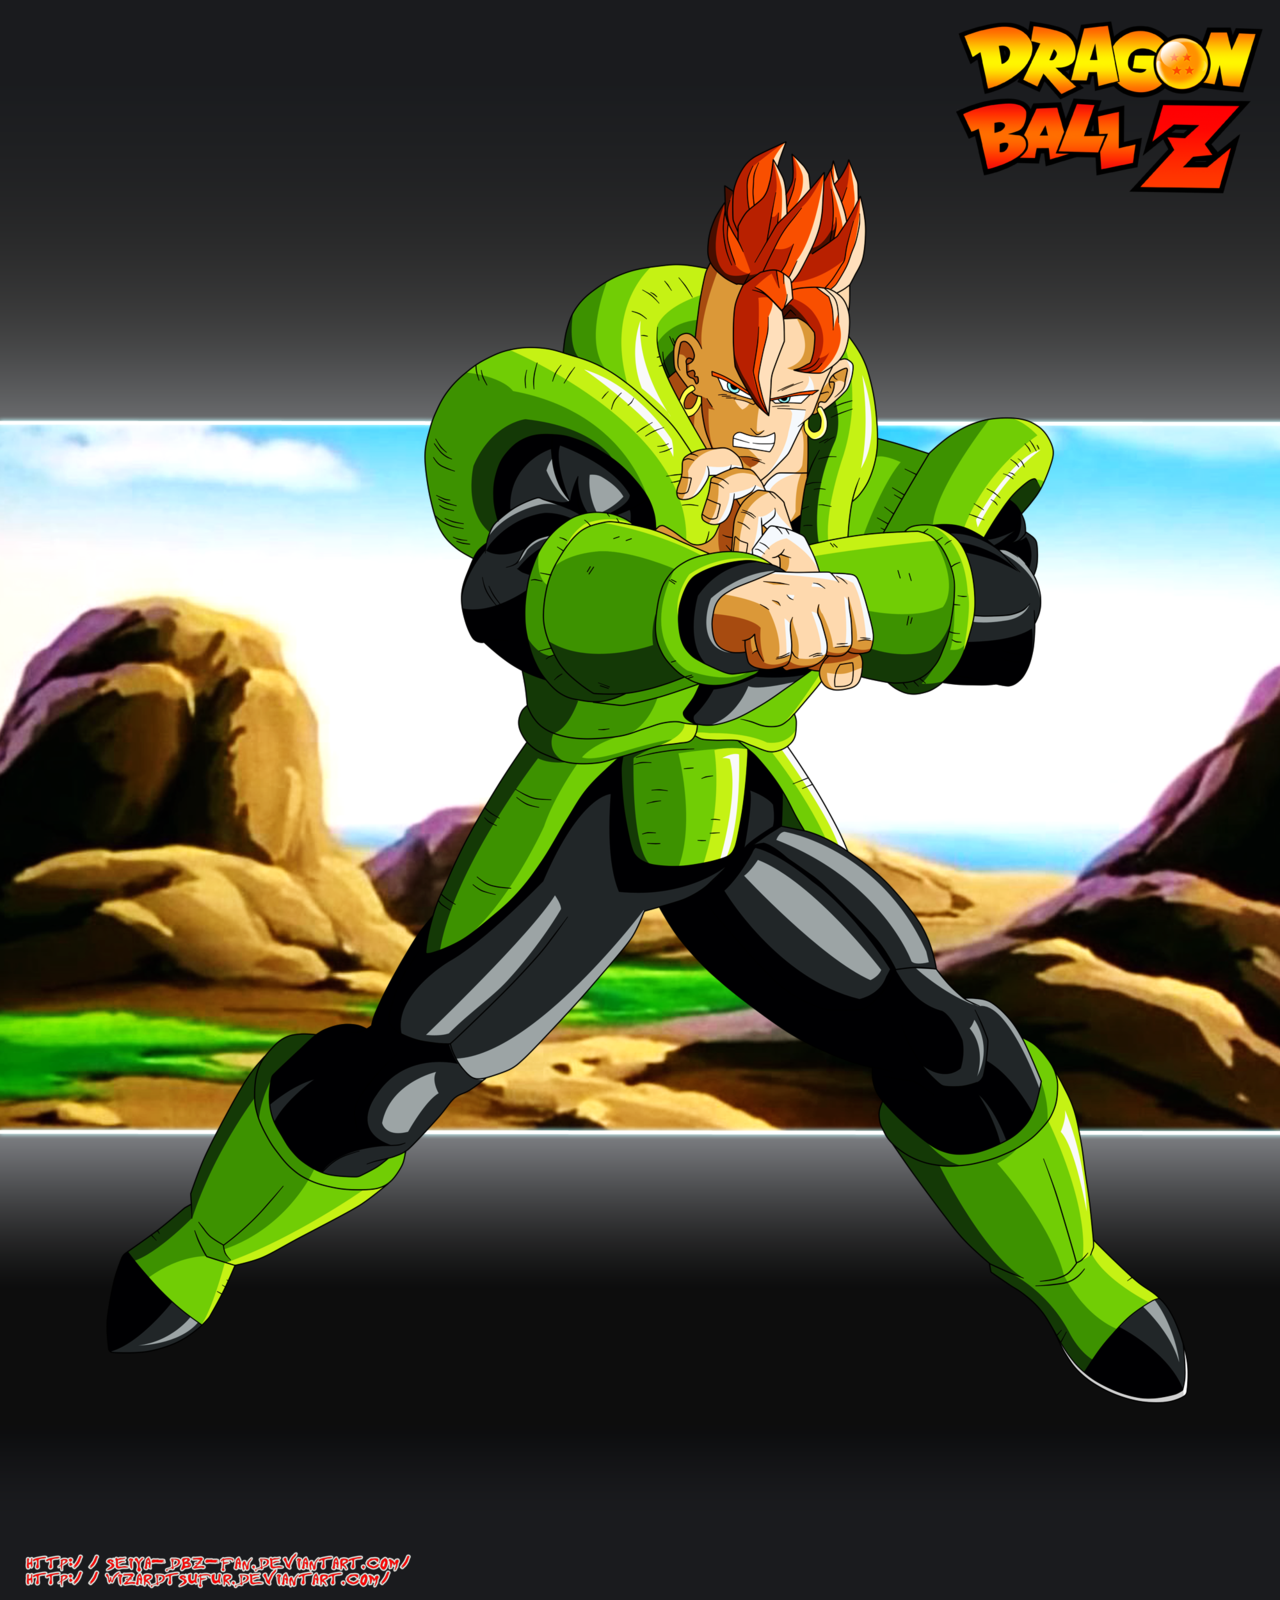 Dragon Ball Z - Android 16 by Miguele77 on DeviantArt